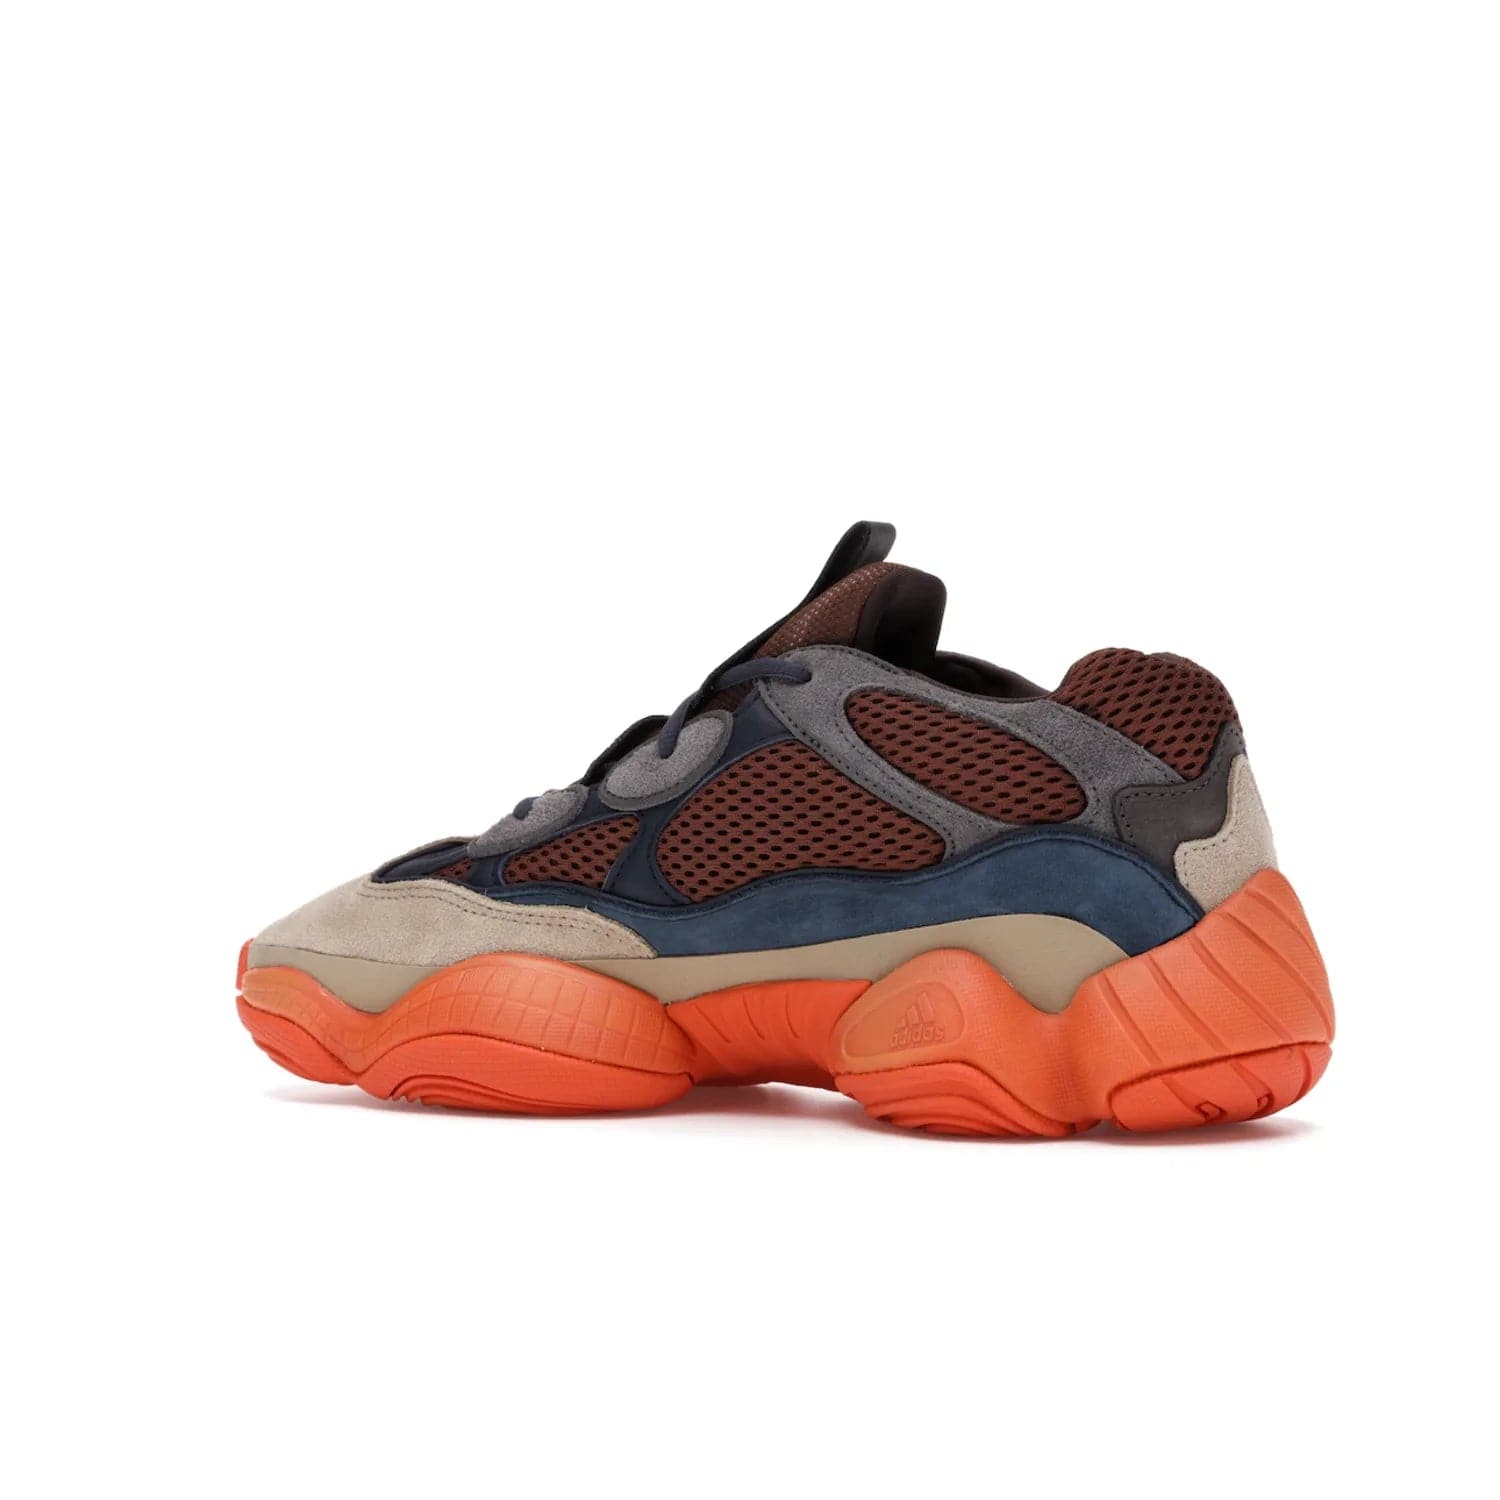 adidas Yeezy 500 Enflame - Image 22 - Only at www.BallersClubKickz.com - Step into style with the adidas Yeezy 500 Enflame. Mix of mesh, leather, and suede layered together to create tonal-brown, dark blue, & orange. Orange AdiPRENE sole provides superior cushioning & comfort. Get yours and experience maximum style.